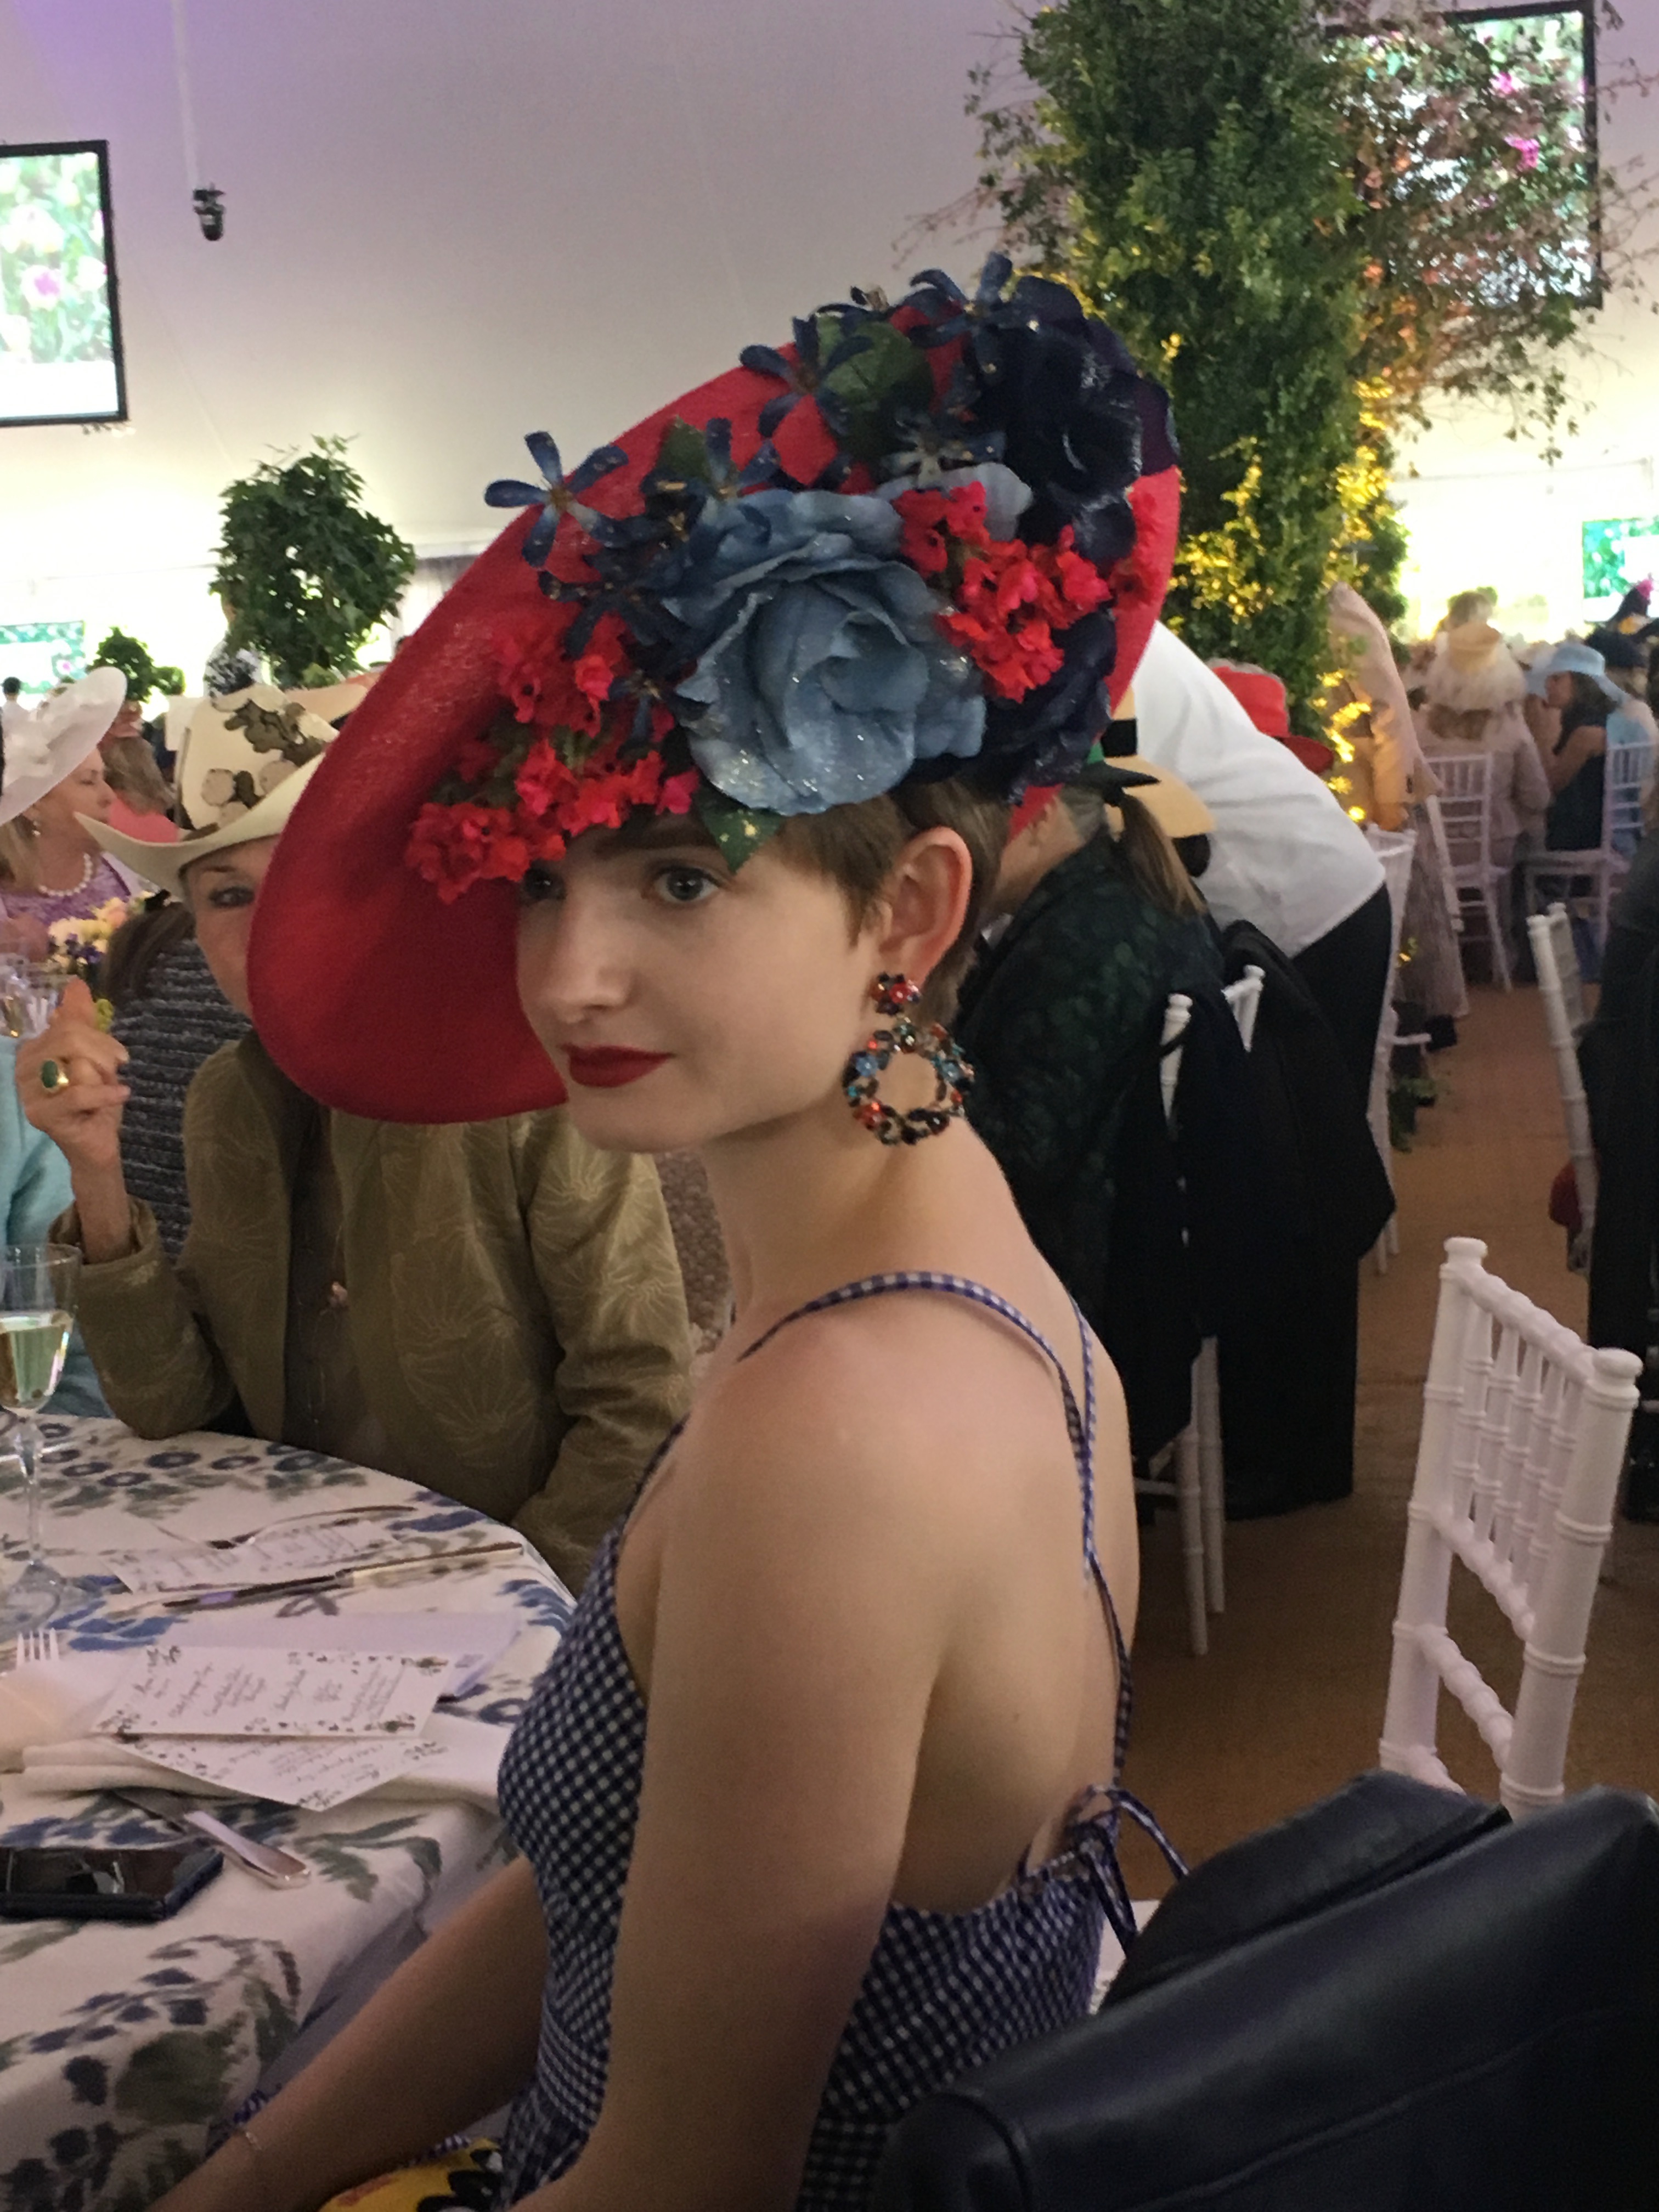 Ladies Who Lunch in Hats : A Careerist Slideshow